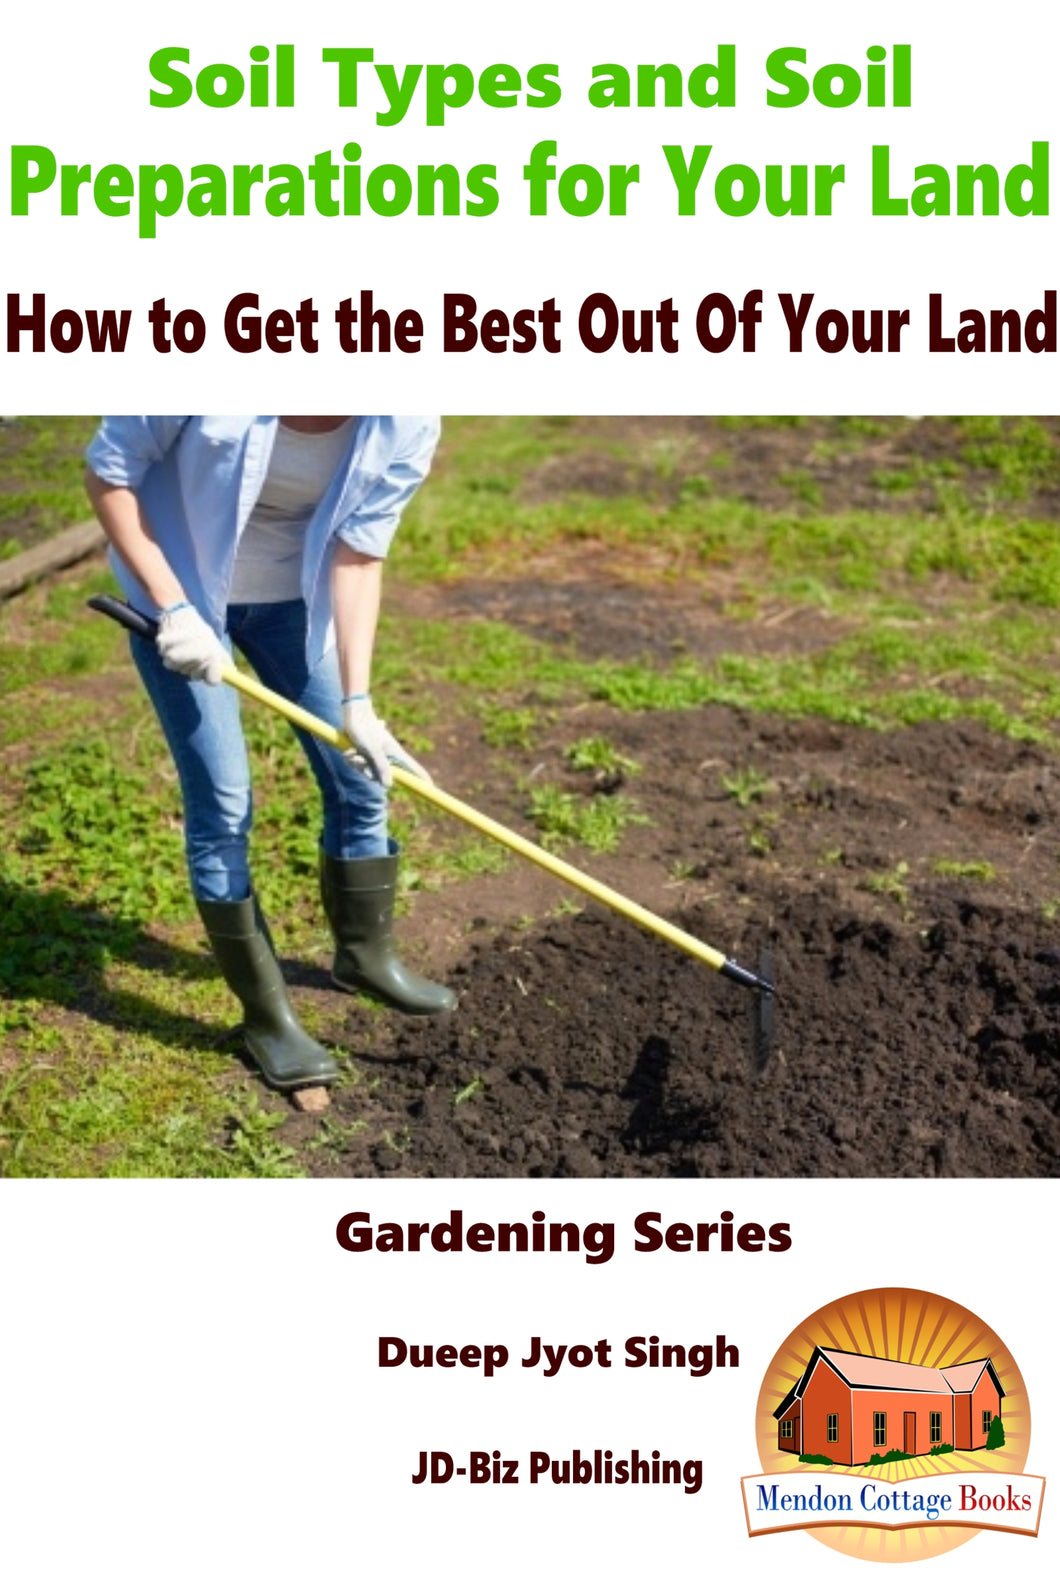 Soil Types and Soil Preparation for Your Land